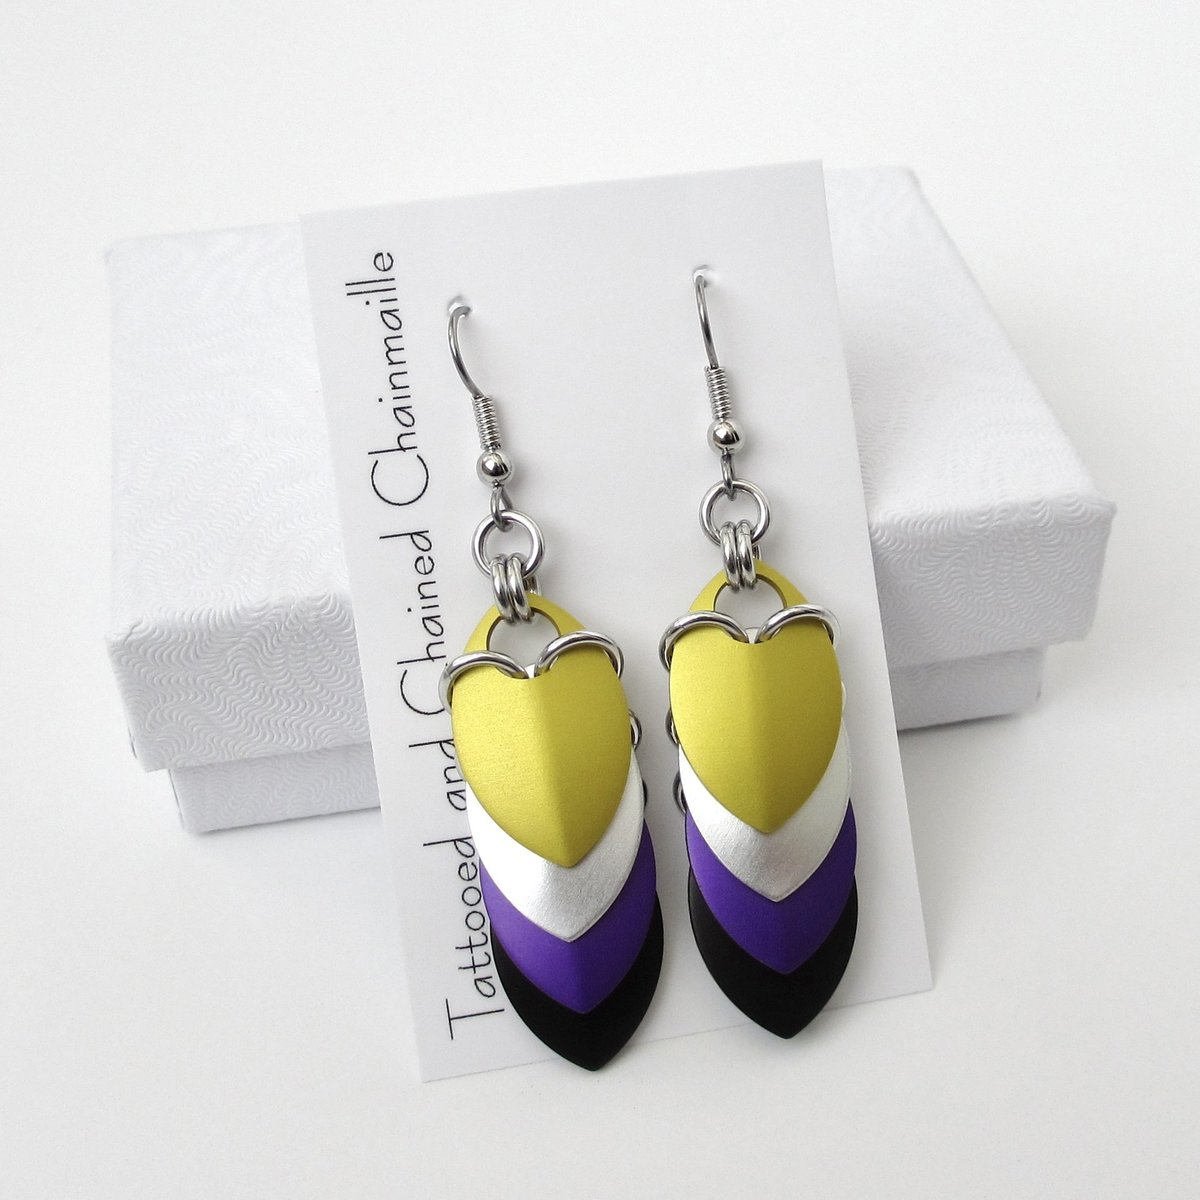 Nonbinary pride earrings, chainmail scales earrings, nonbinary pride jewelry; yellow white purple black